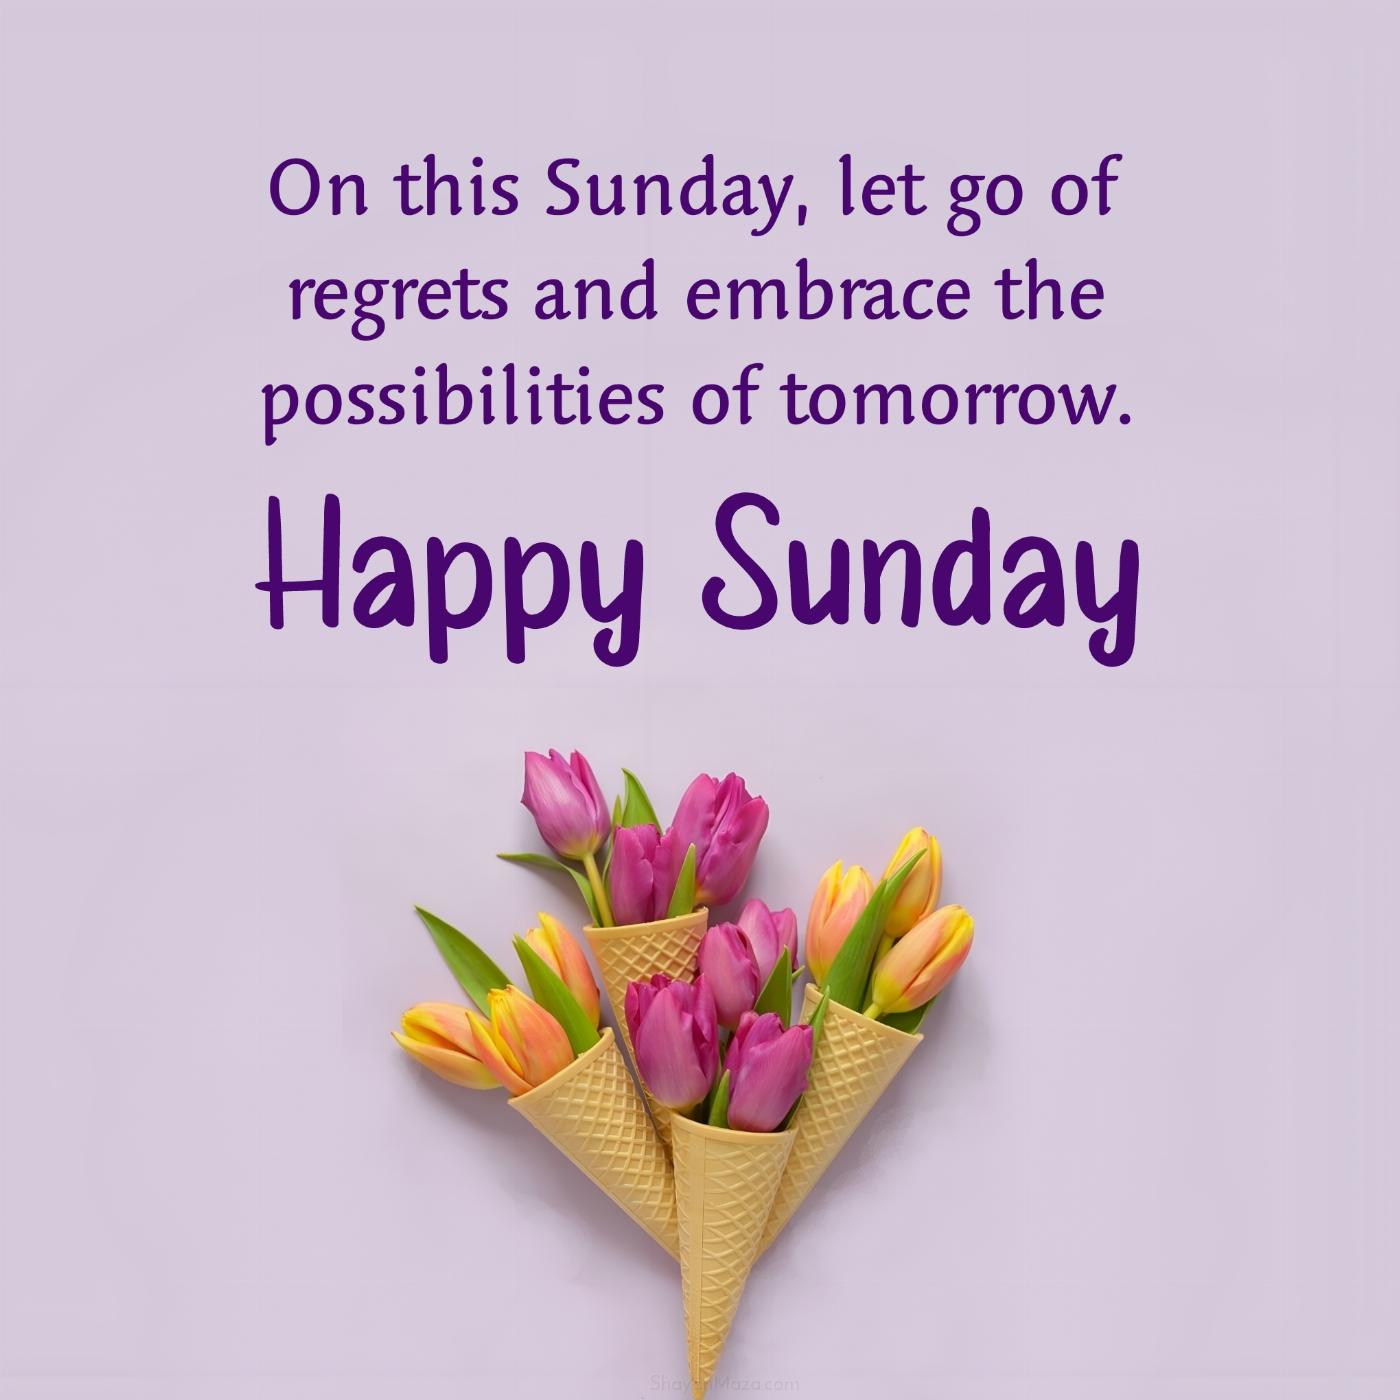 On this Sunday let go of regrets and embrace the possibilities